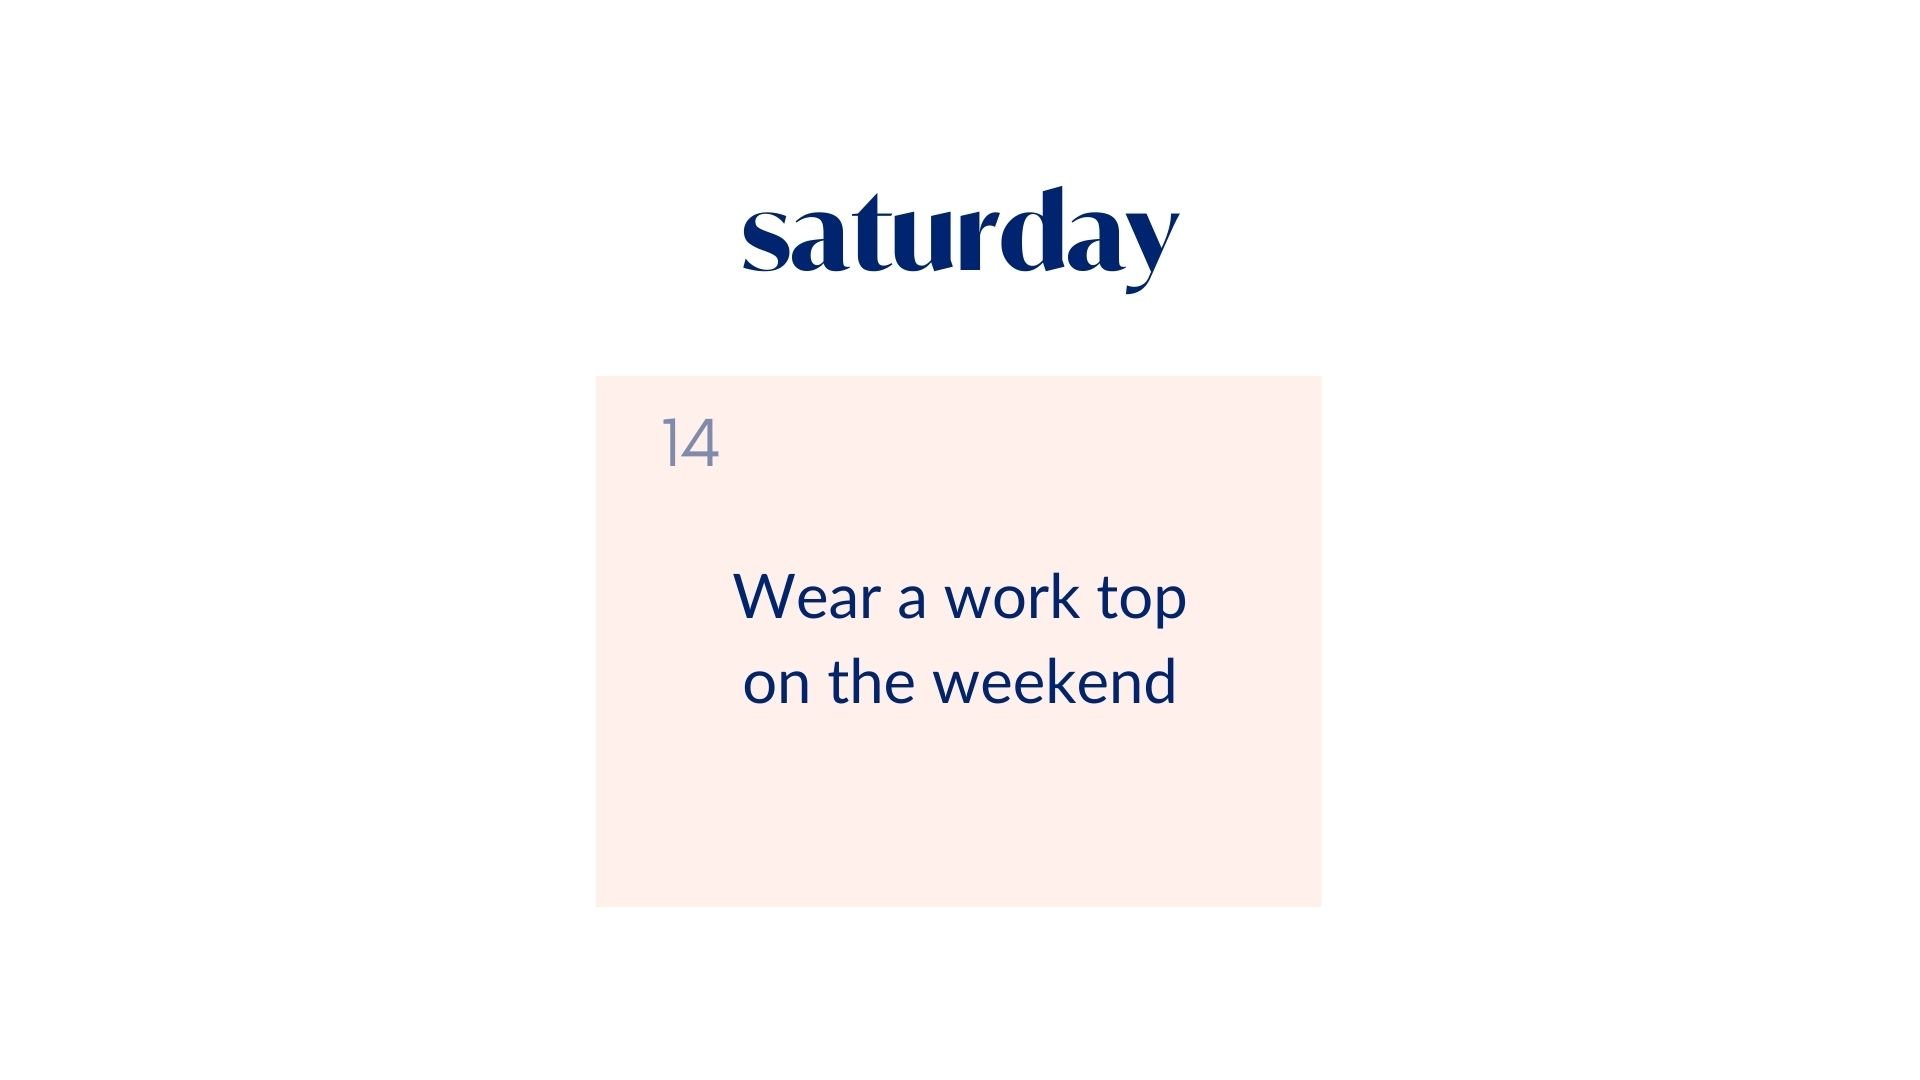 Day 14: Wear a work top on the weekend